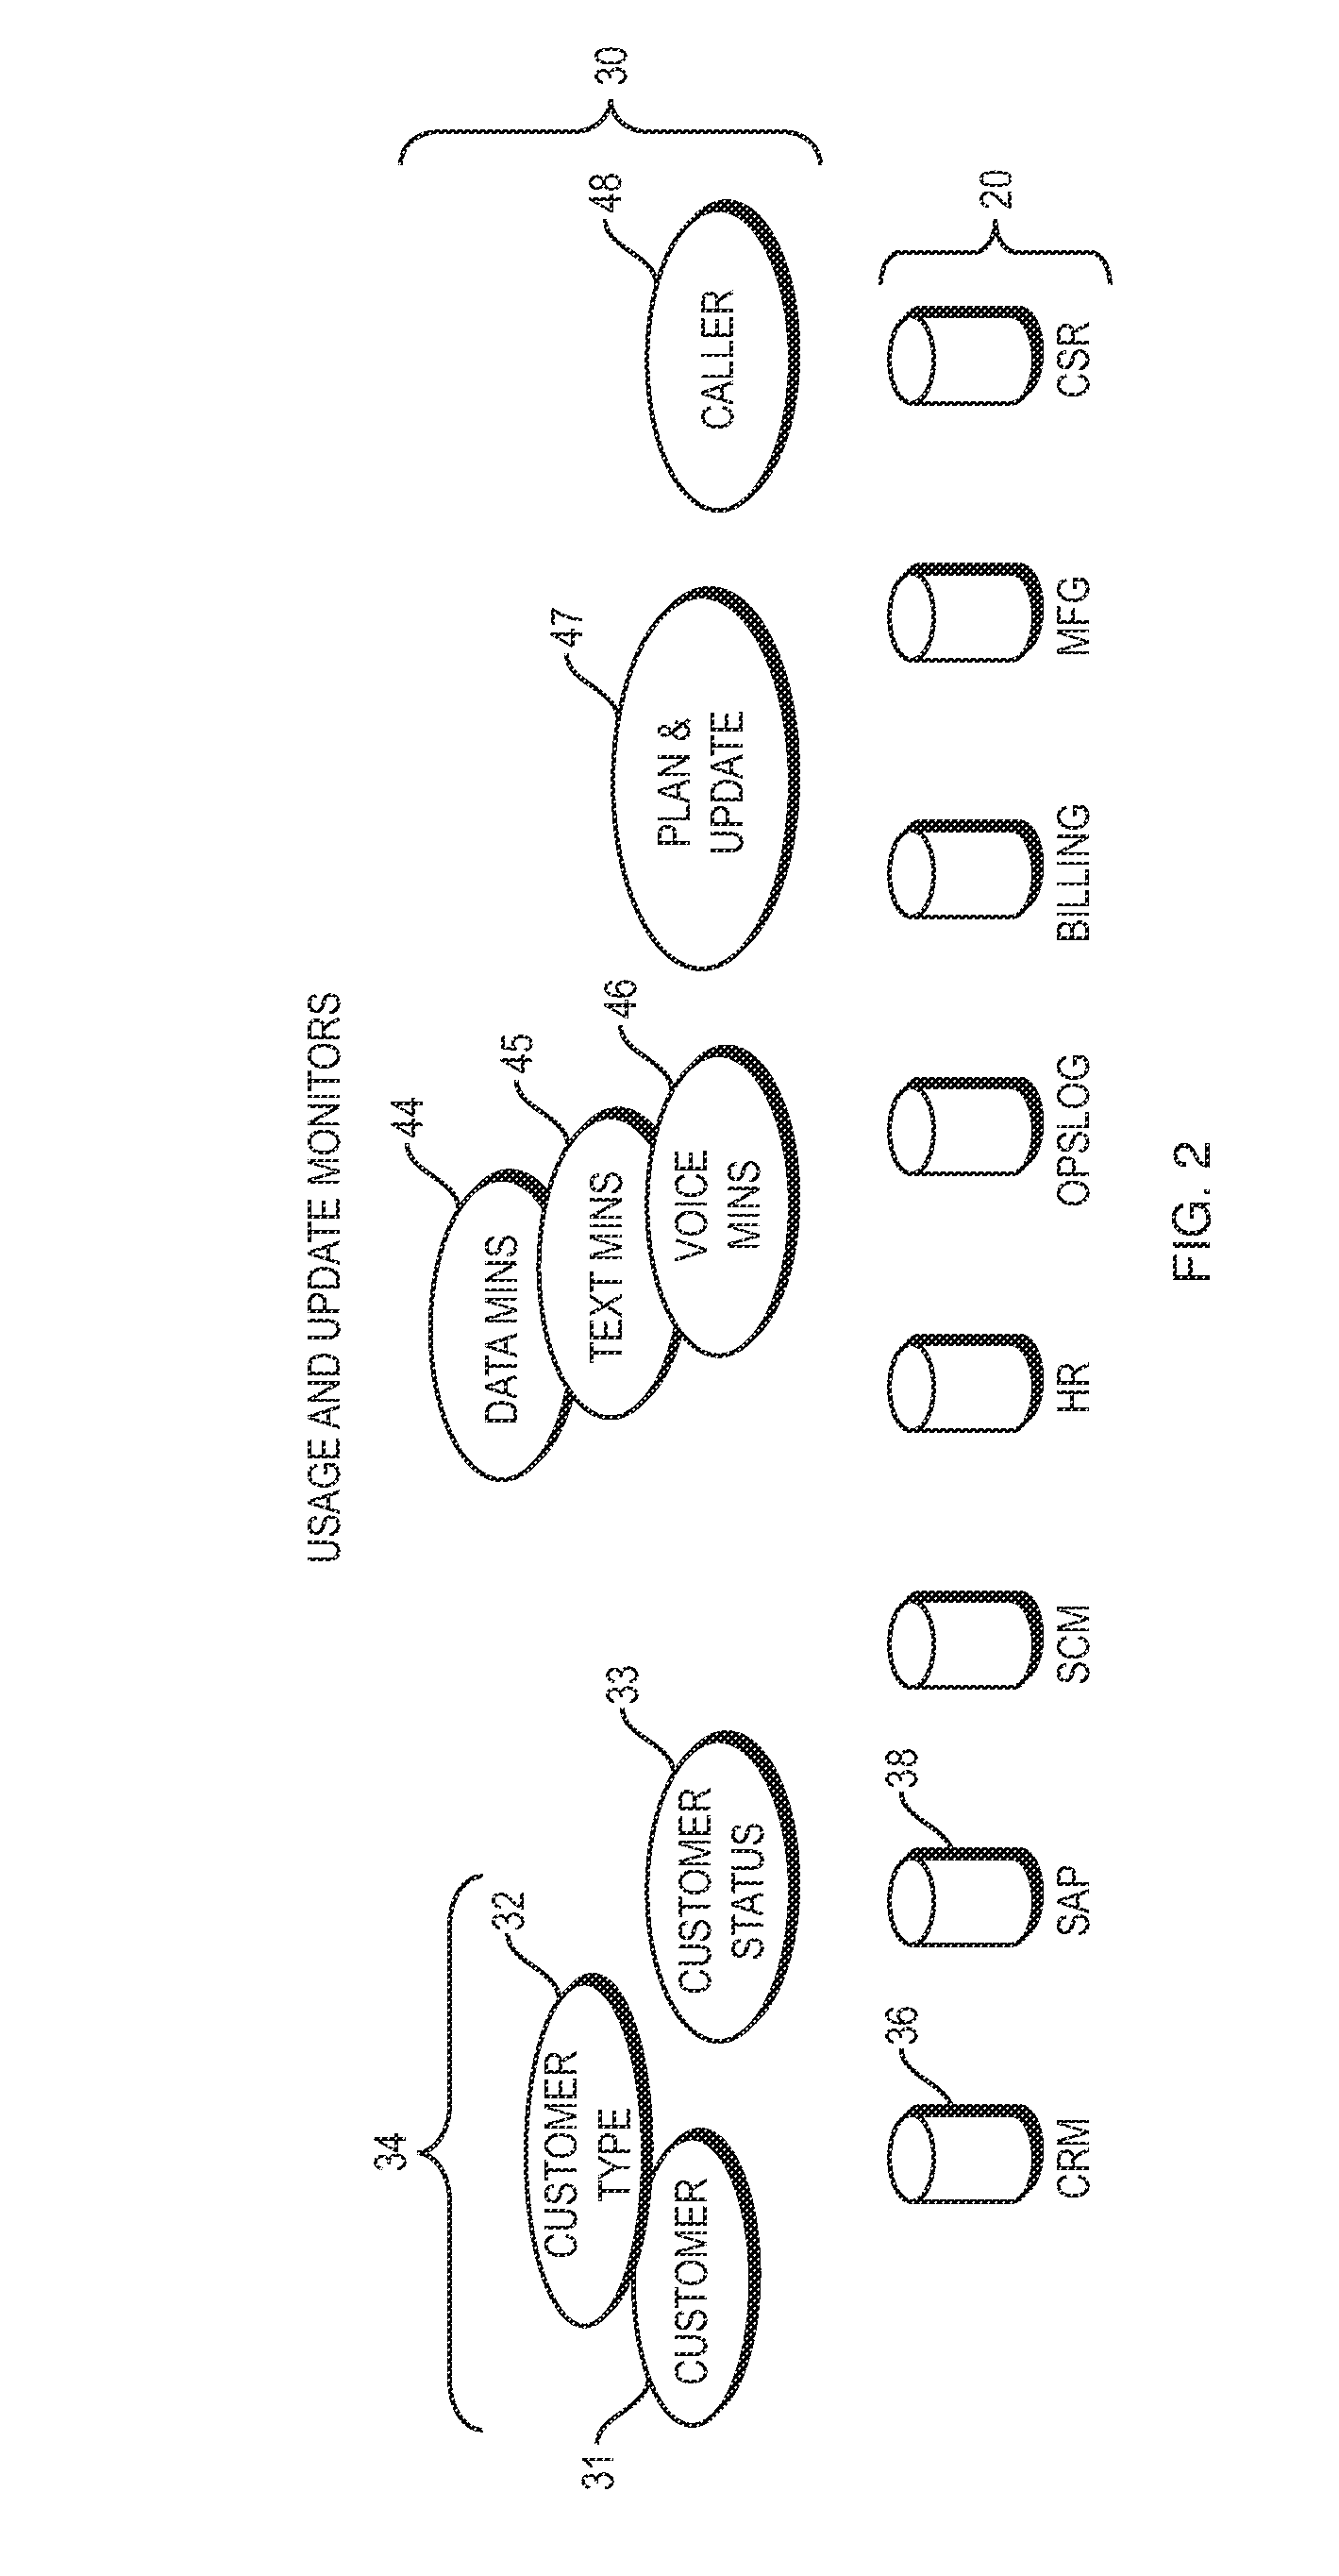 System and method for employing the use of neural networks for the purpose of real-time business intelligence and automation control